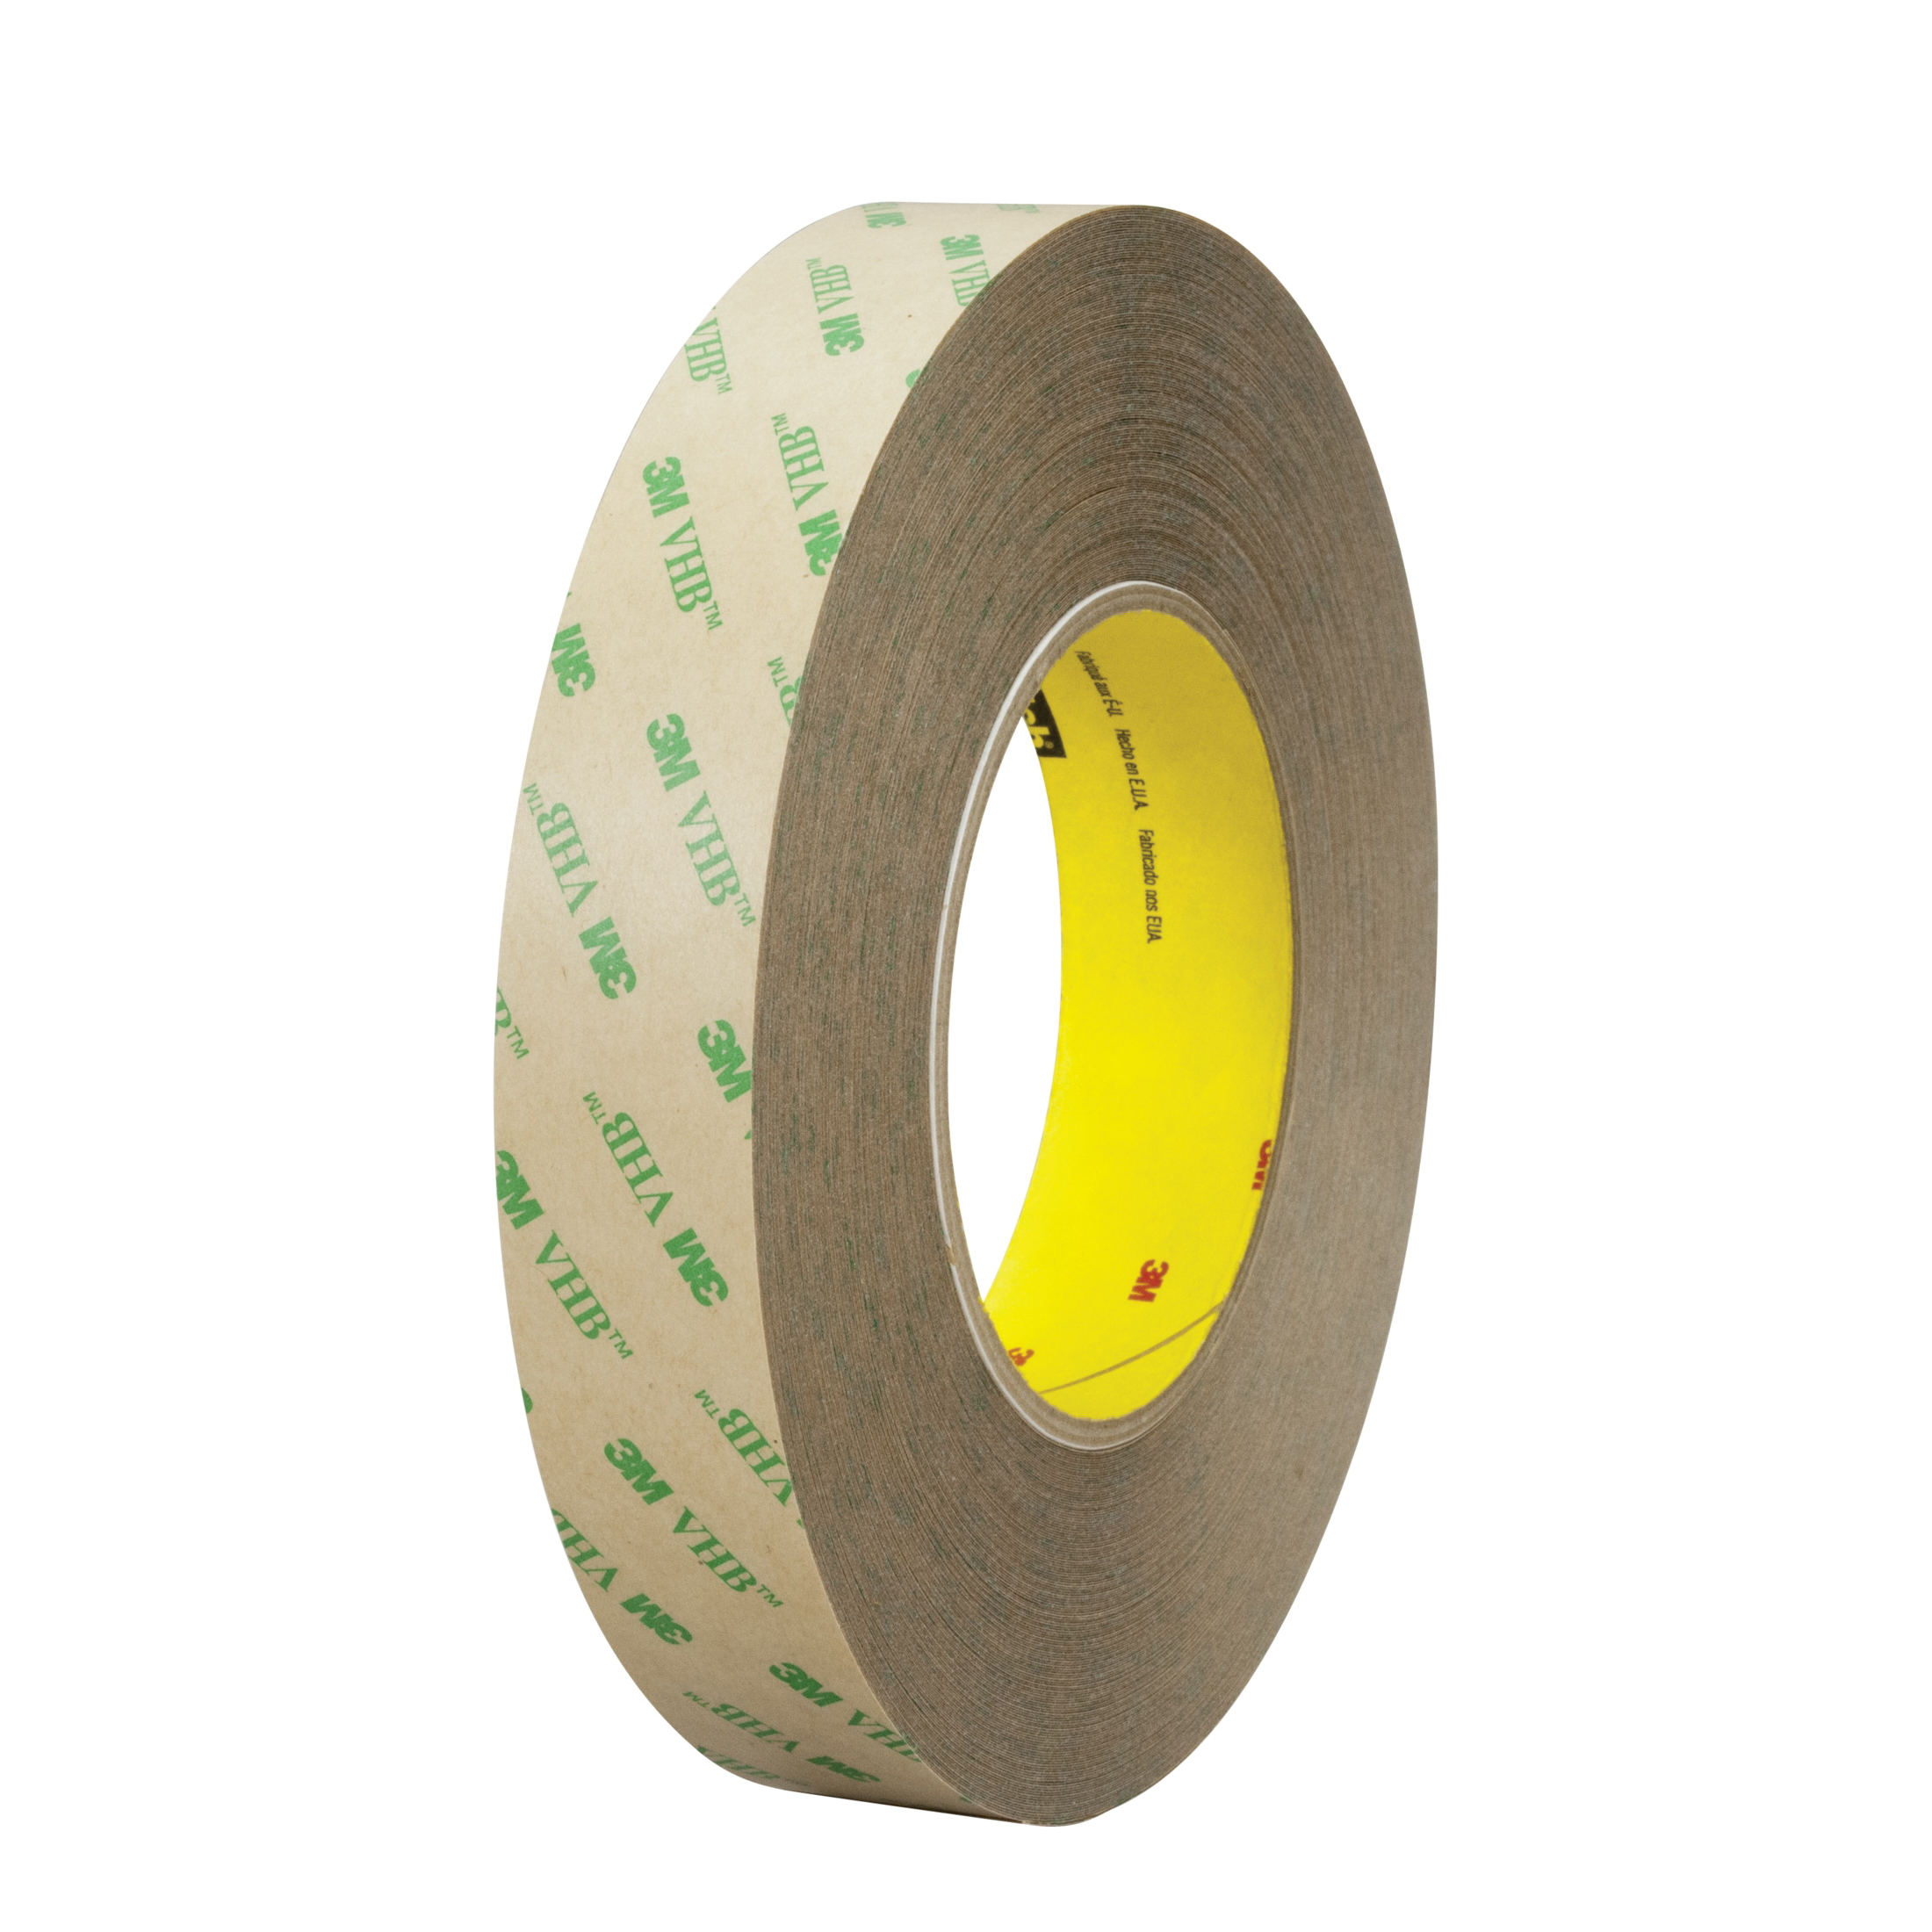 3M™ VHB™ 021200-13970 High Performance Low Tack Adhesive Transfer Tape, 60 yd L x 3/4 in W, 9.2 mil THK, 5 mil 100MP Acrylic Adhesive, Clear